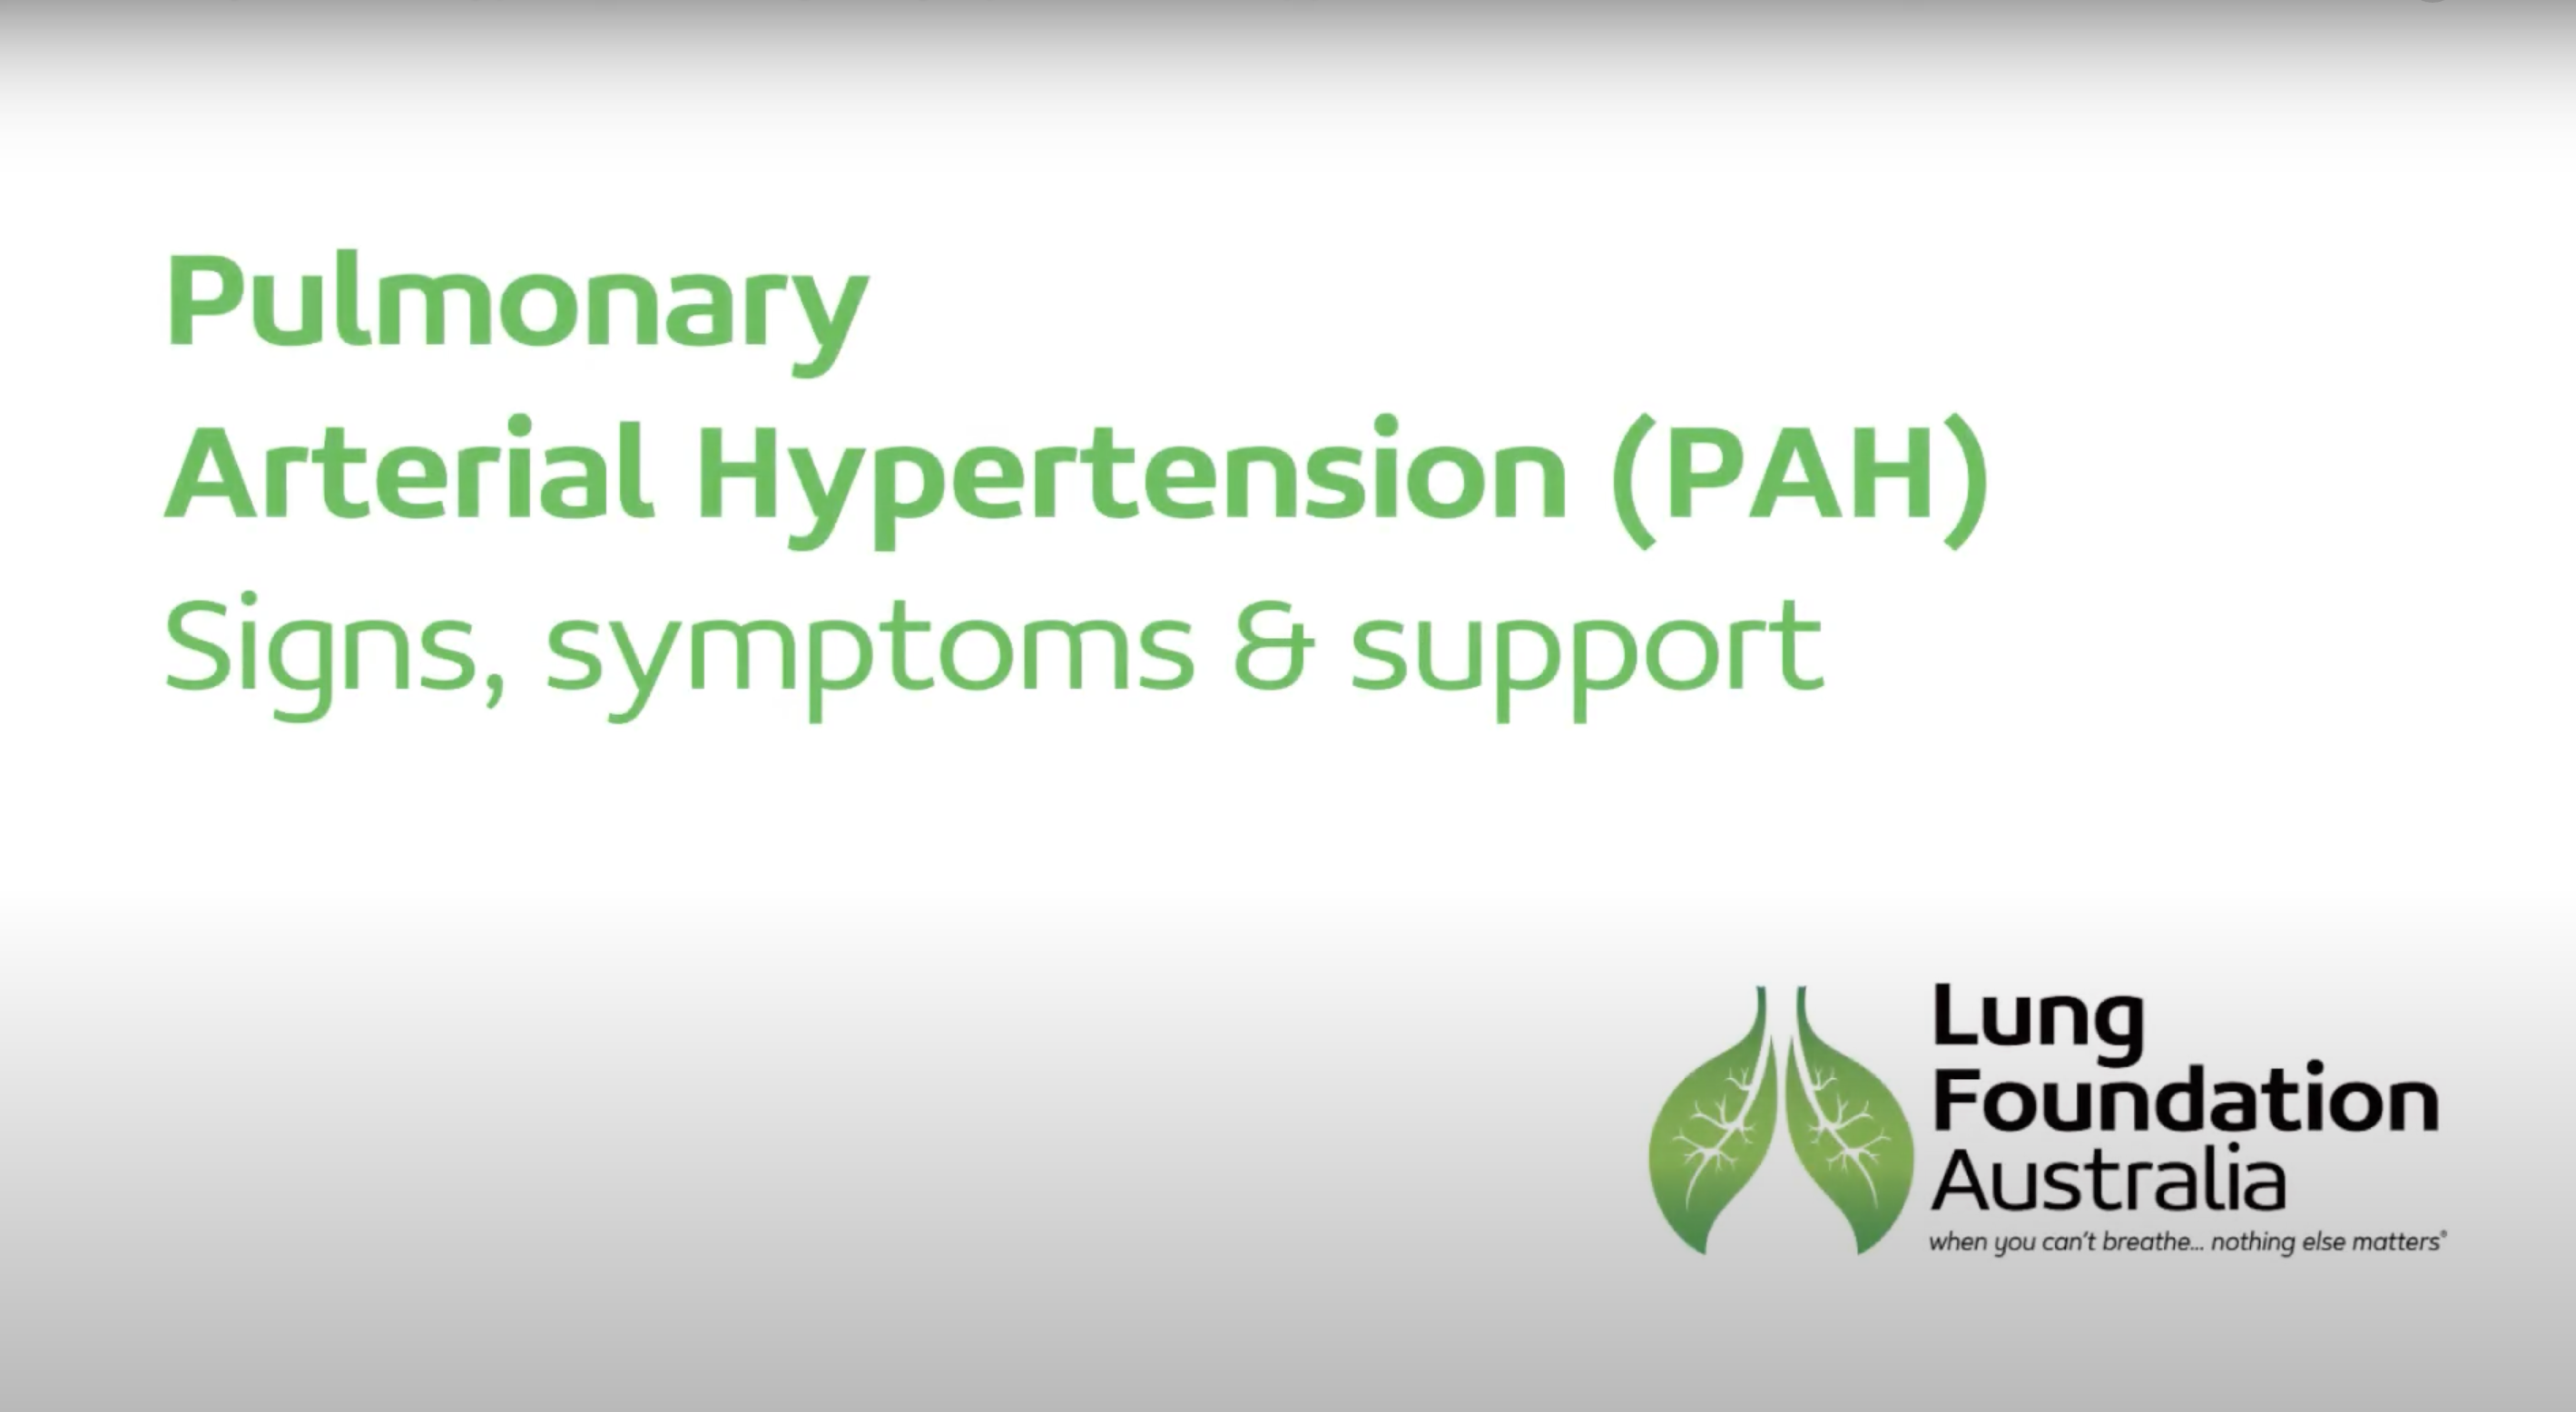 Pulmonary Arterial Hypertension: Signs, symptoms and support